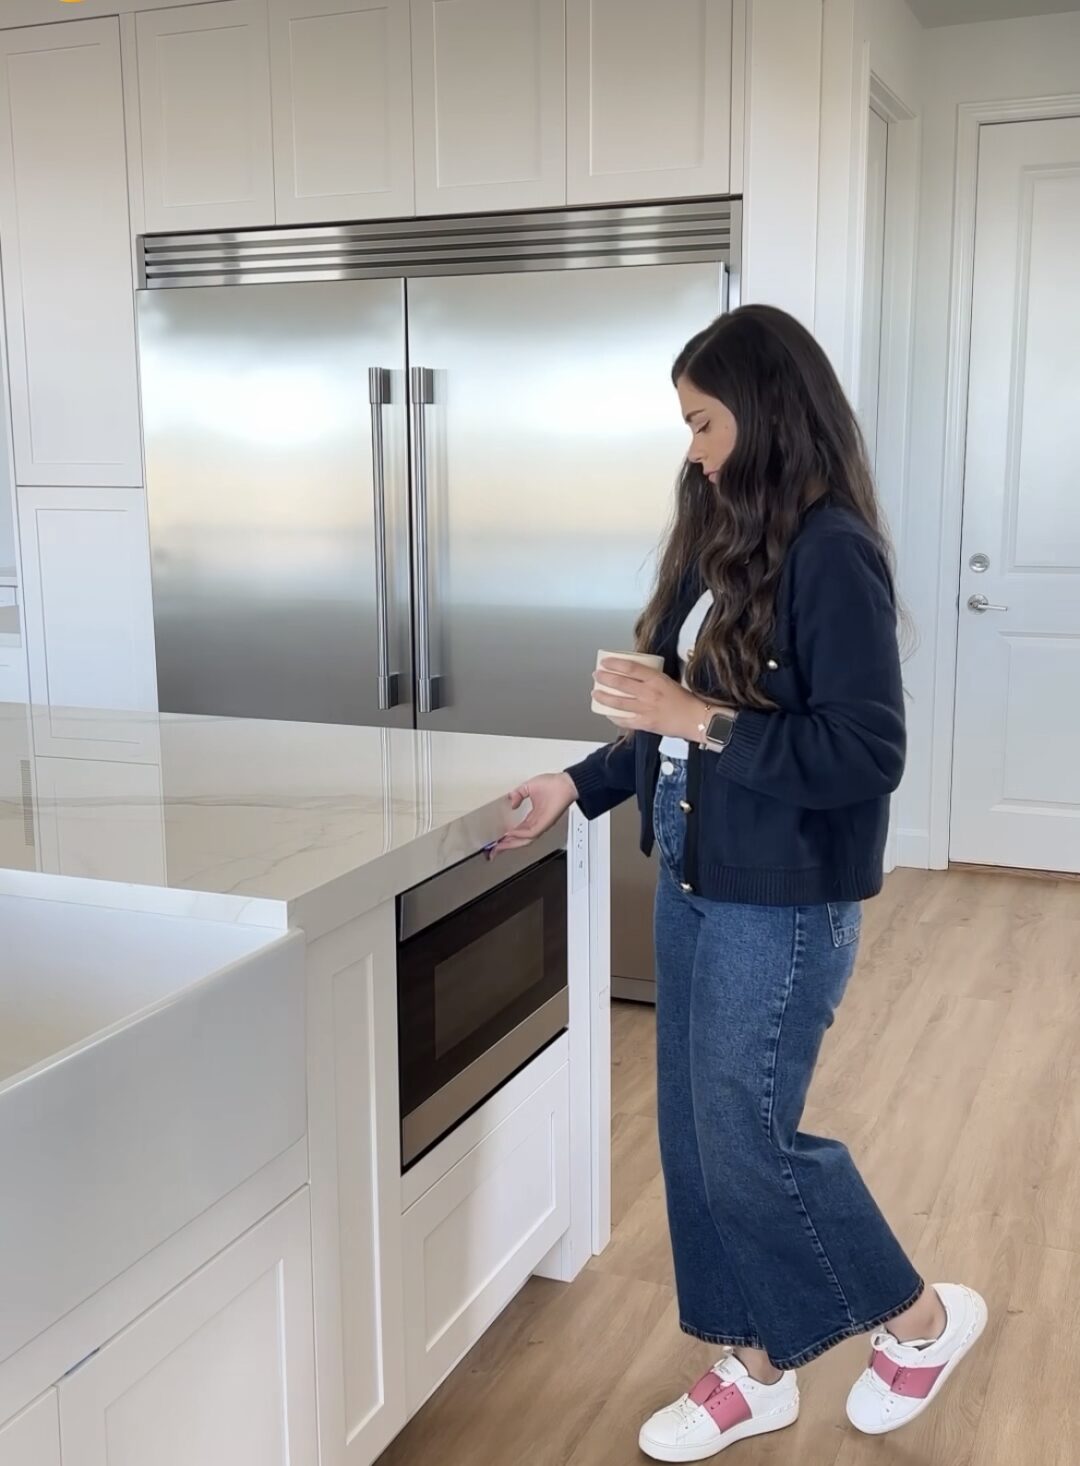 Ruby Shero's collaboration featuring the Sharp Smart Easy Wave Microwave Drawer Oven (SMD2489ES)